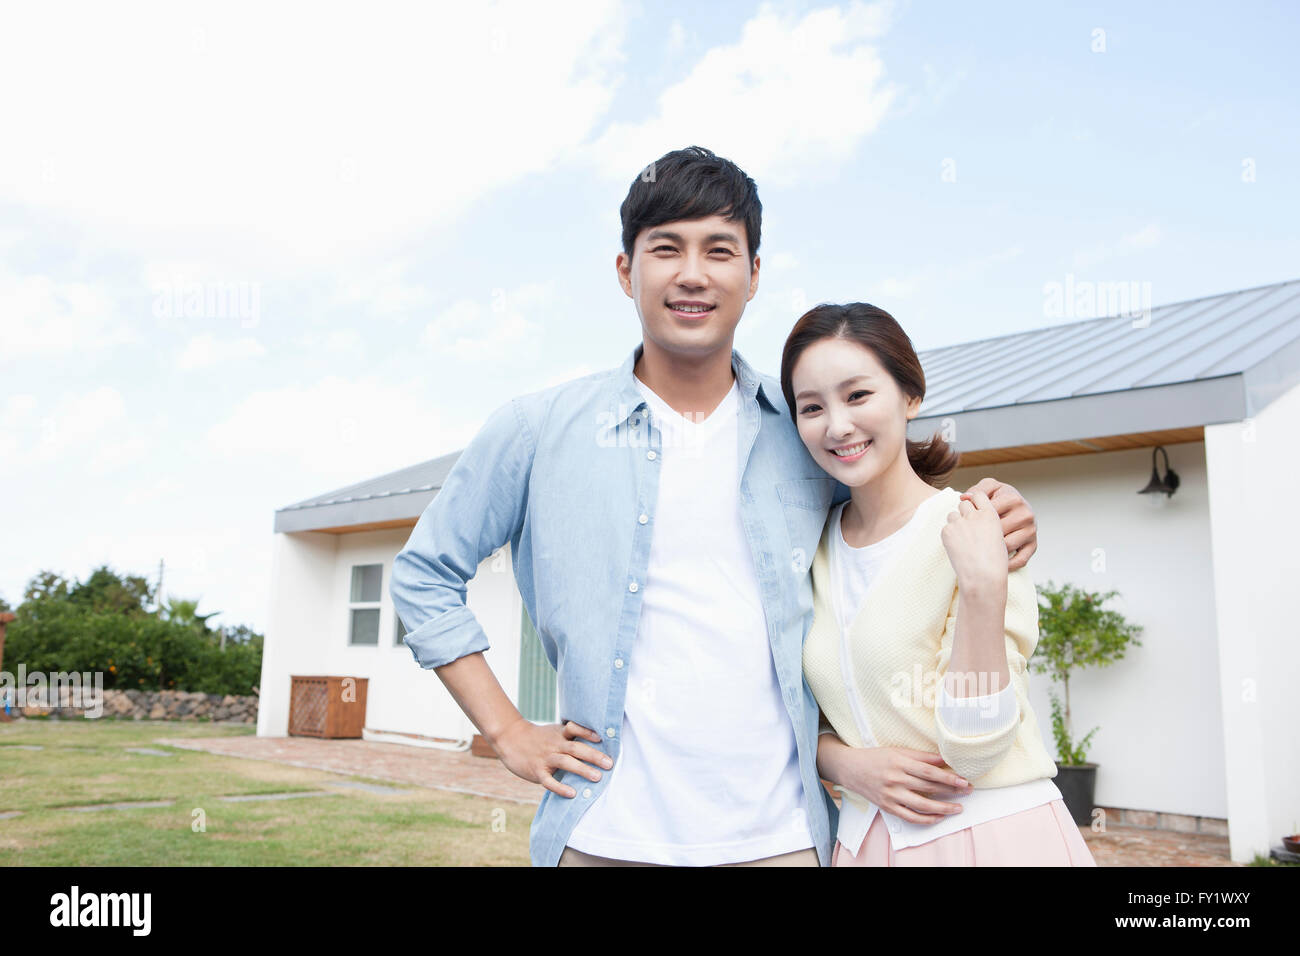 Couple staring forward with a smile at the yard of a house representing rural life Stock Photo